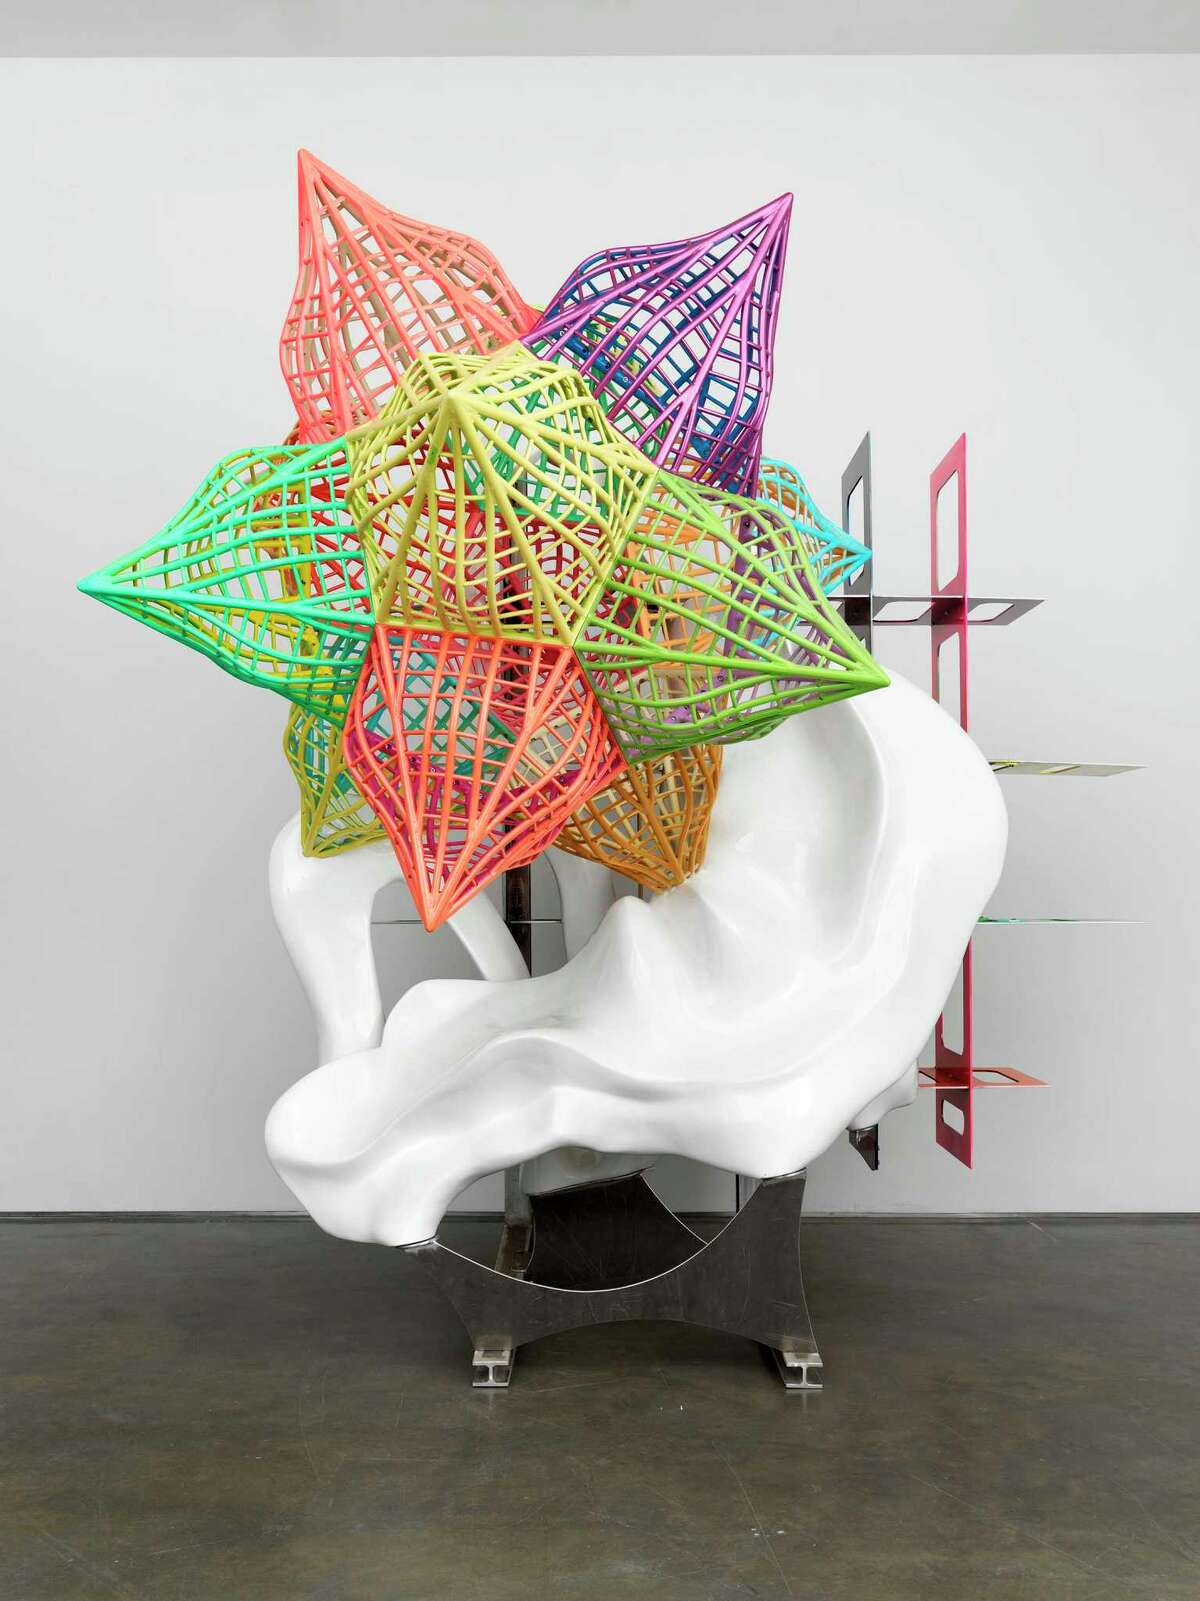 The sculpture “Nessus and Dejanira” is part of an exhibit on Frank Stella’s star-themed work now at the Aldrich Contemporary Art Museum in Ridgefield.